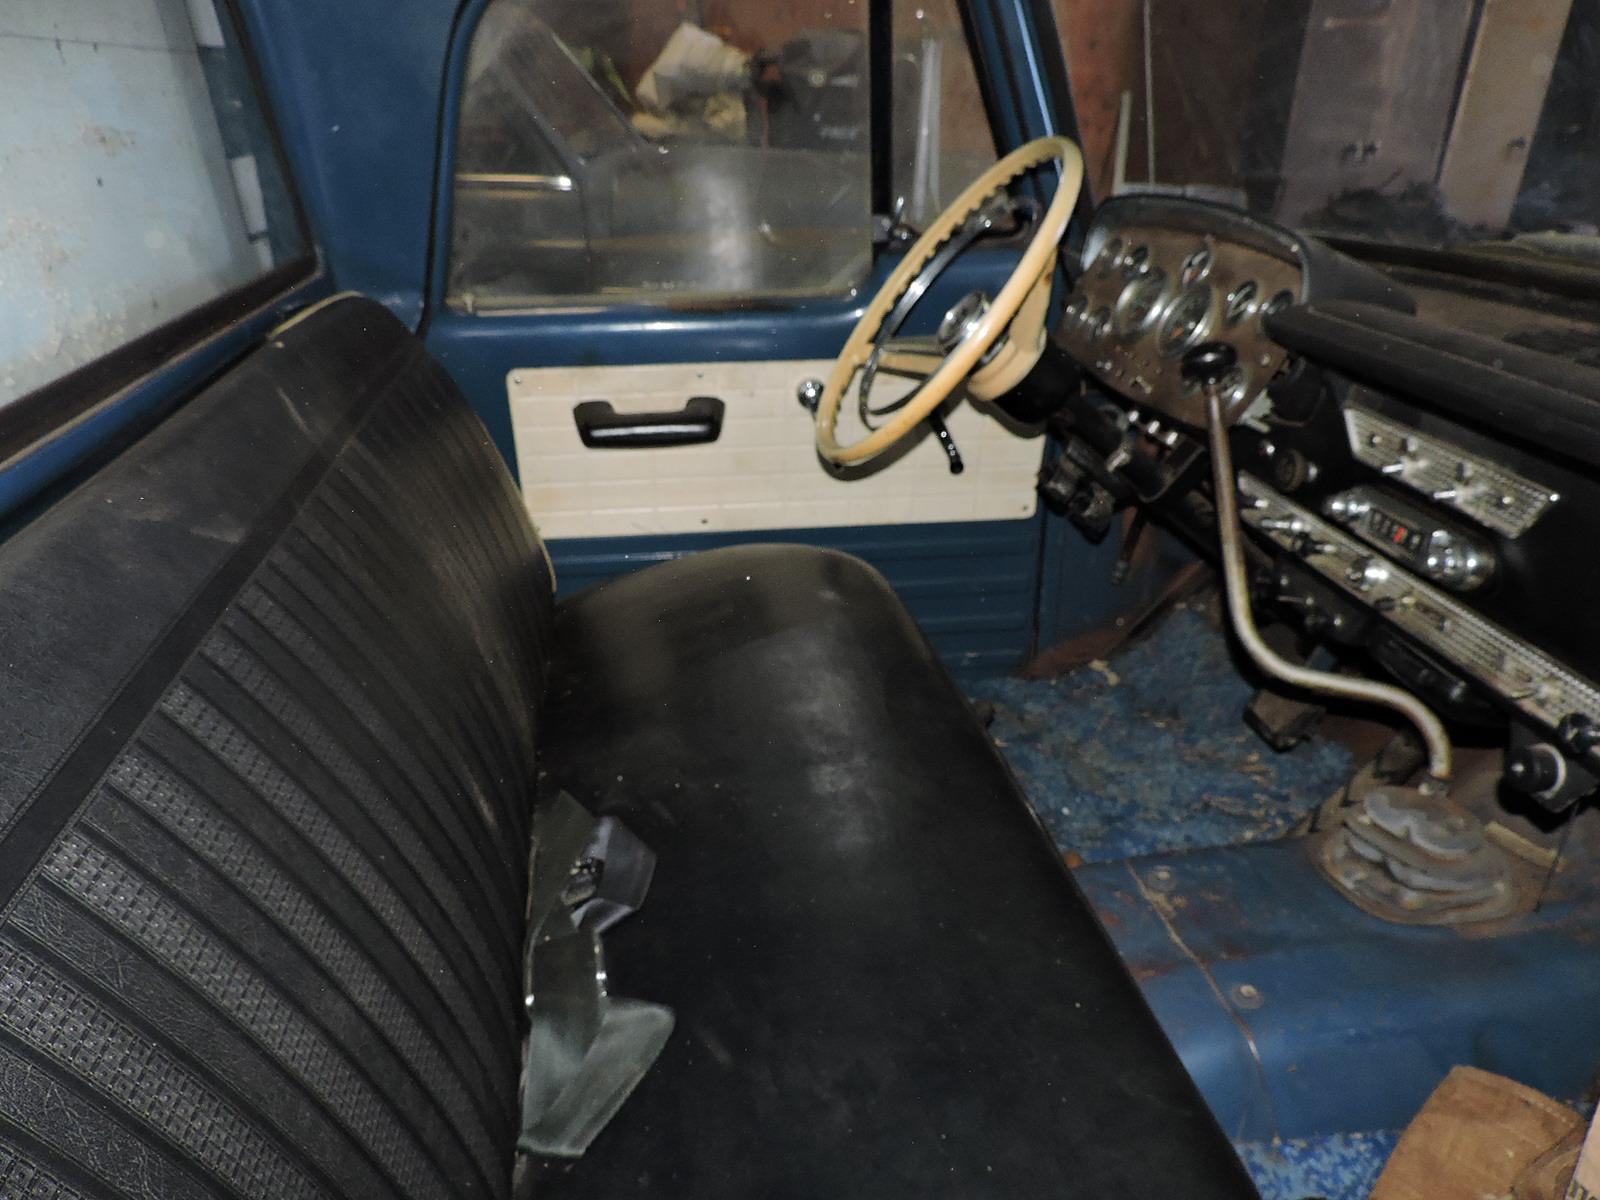 1967 Dodge Half-Ton Pickup / 1-Owner Since New / 4-Speed on the Floor